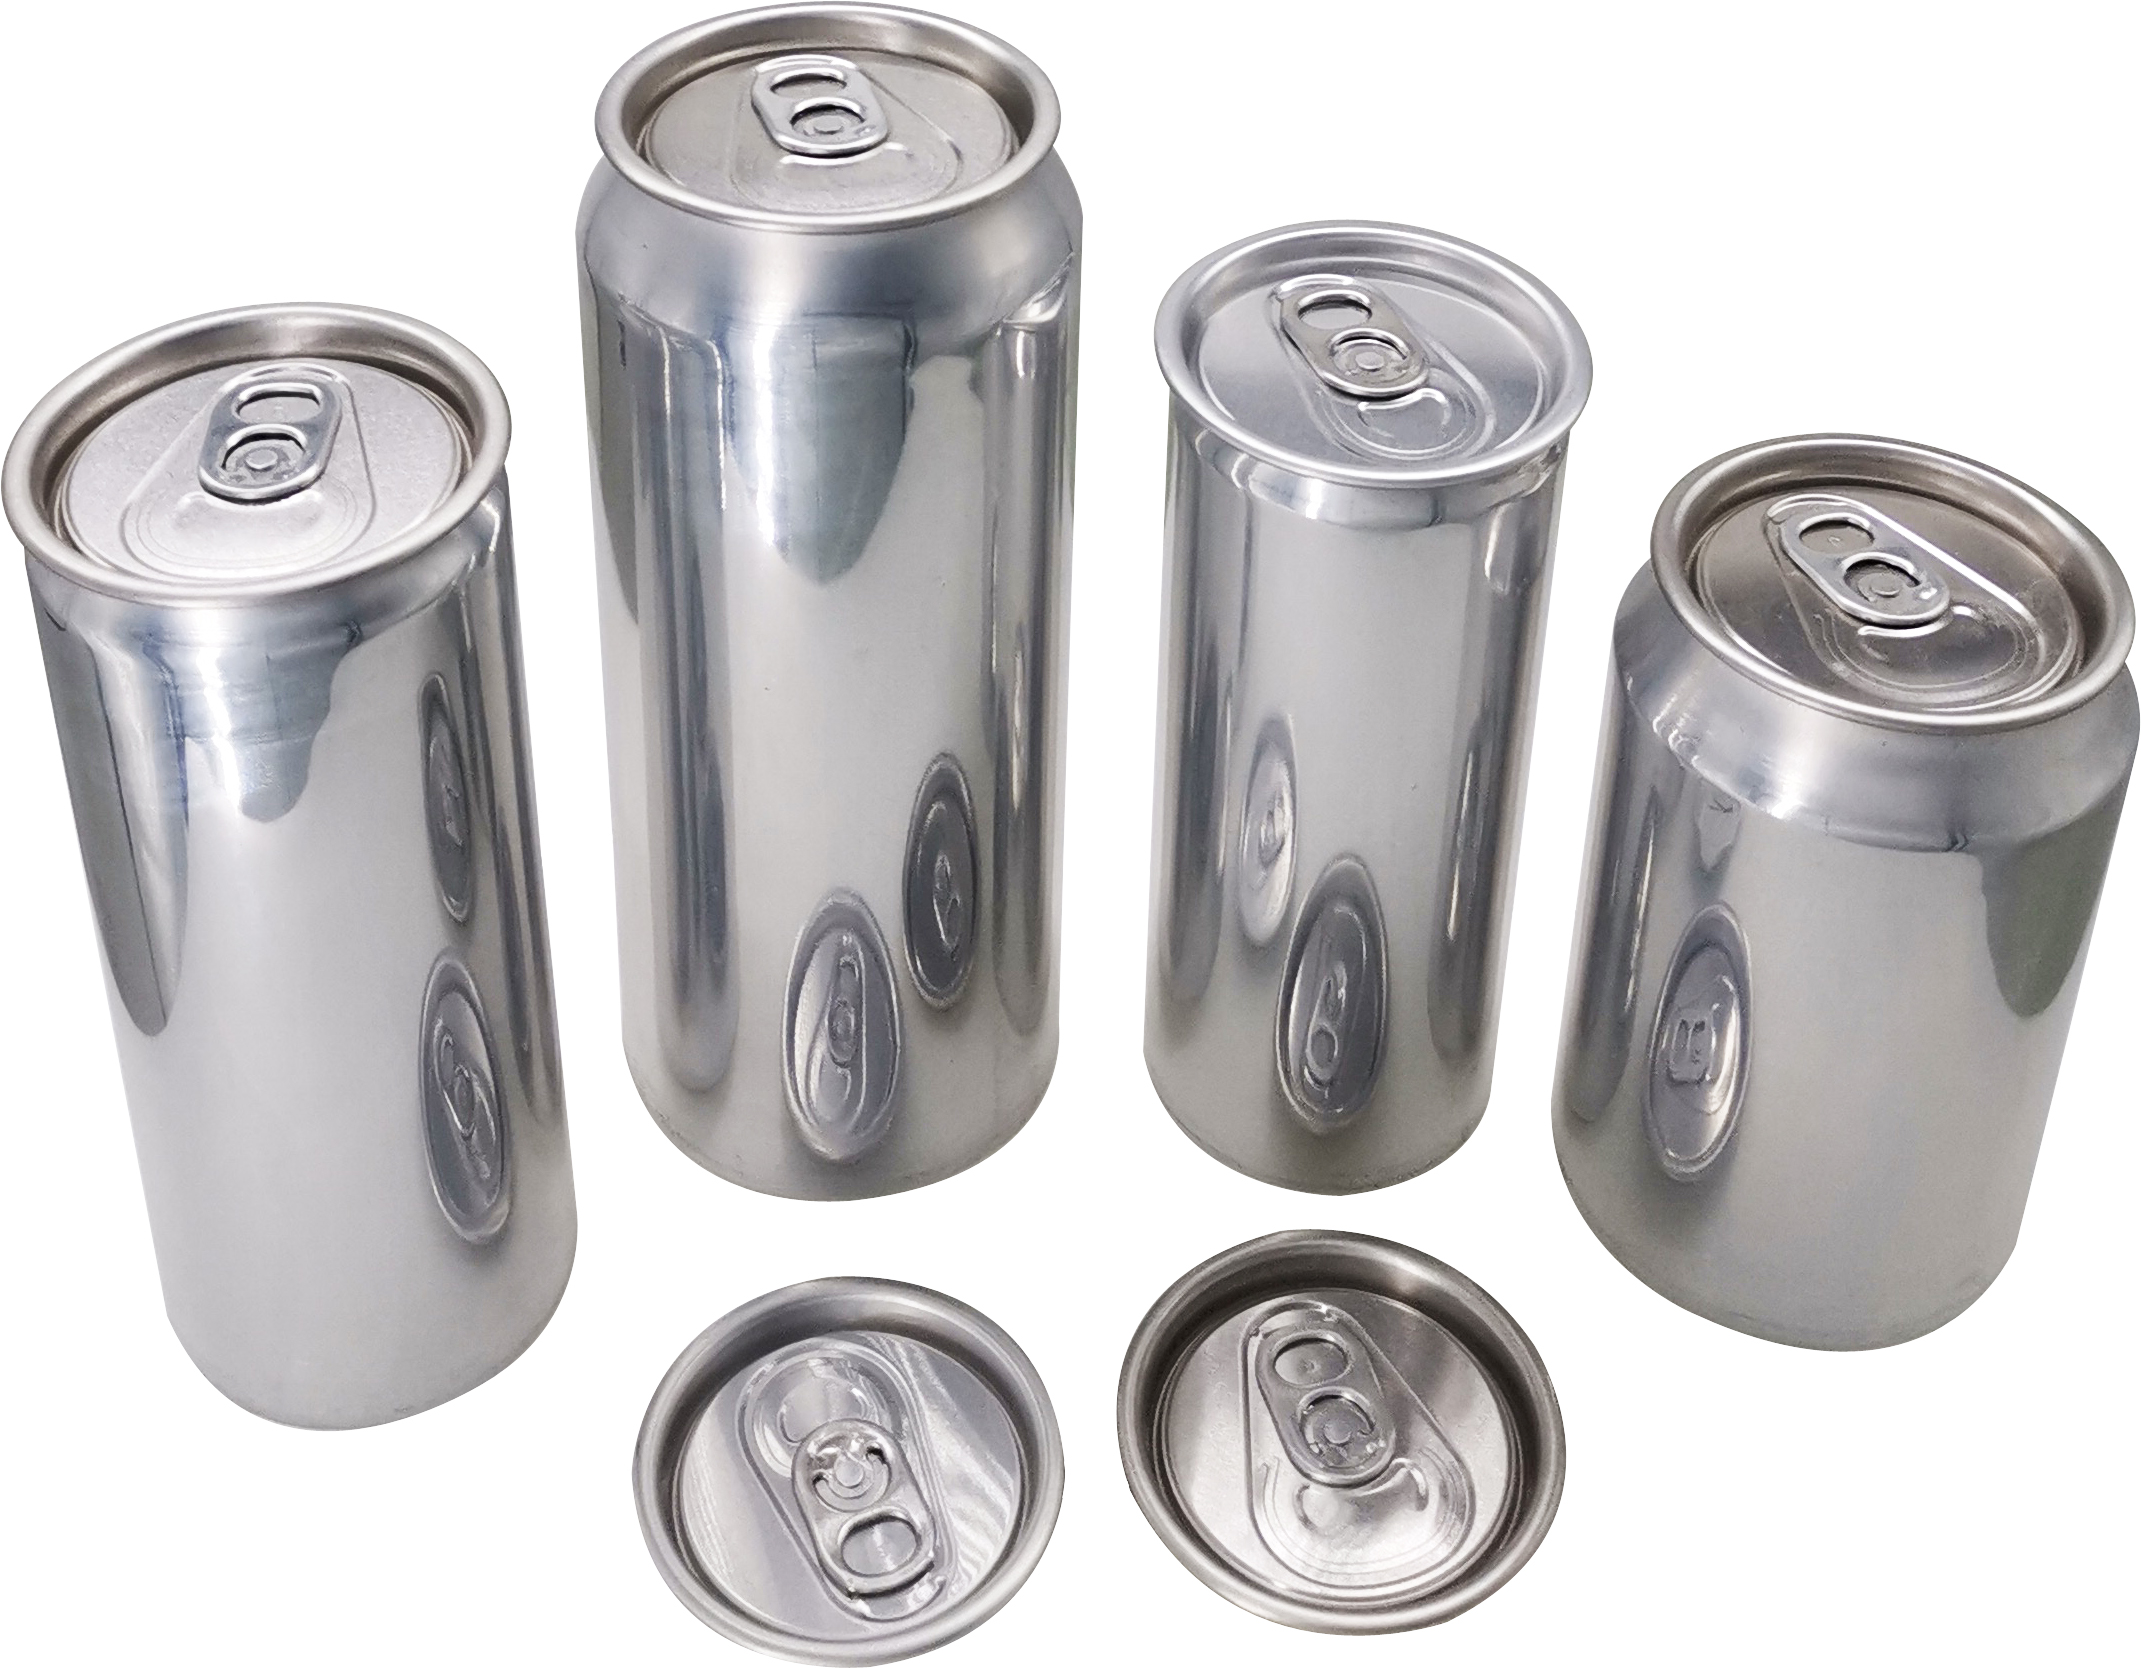 empty cans